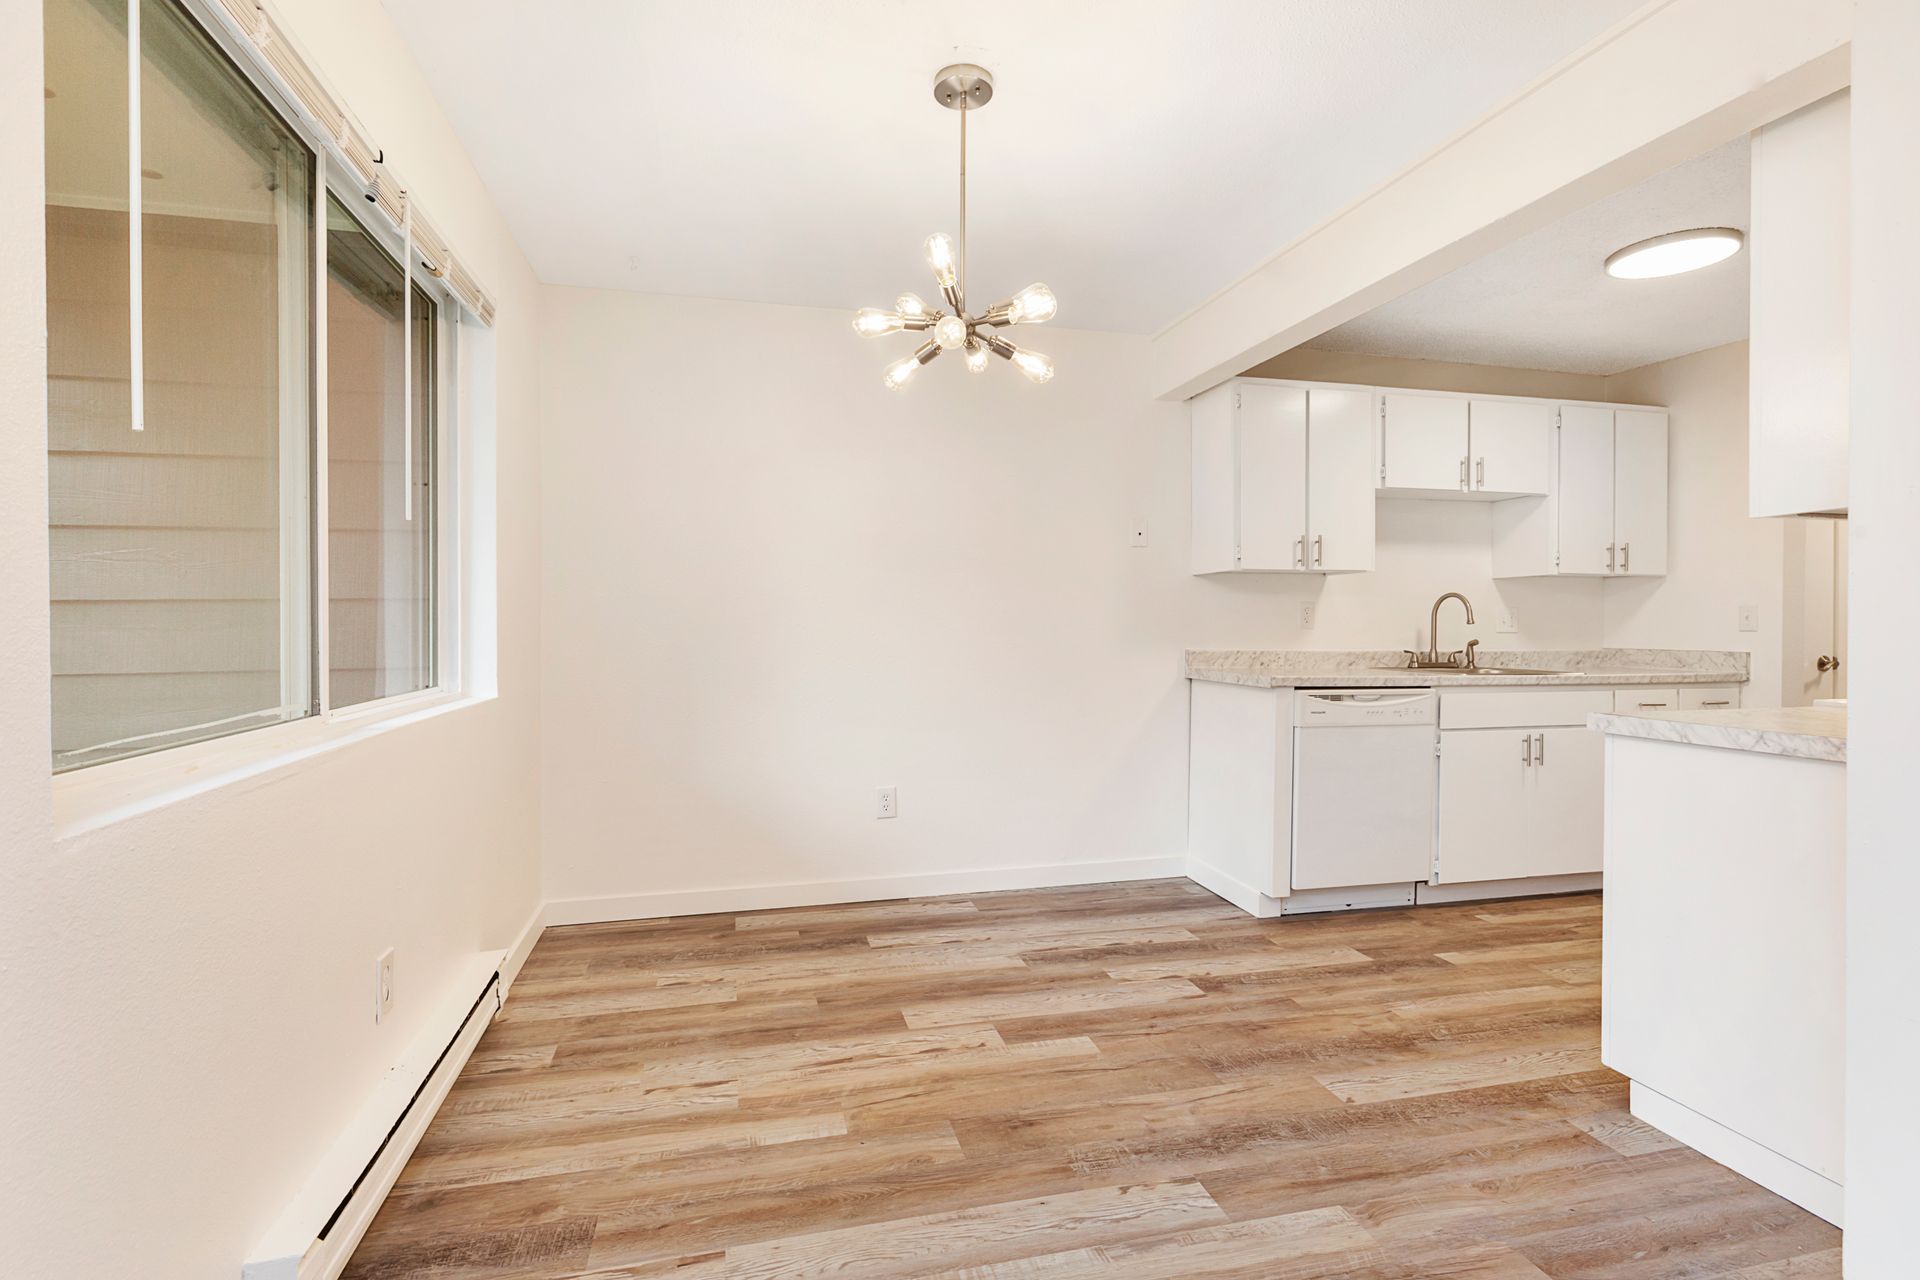 Spacious 1 and 2 bedroom apartments in Edmonds, WA - Come Tour Today!